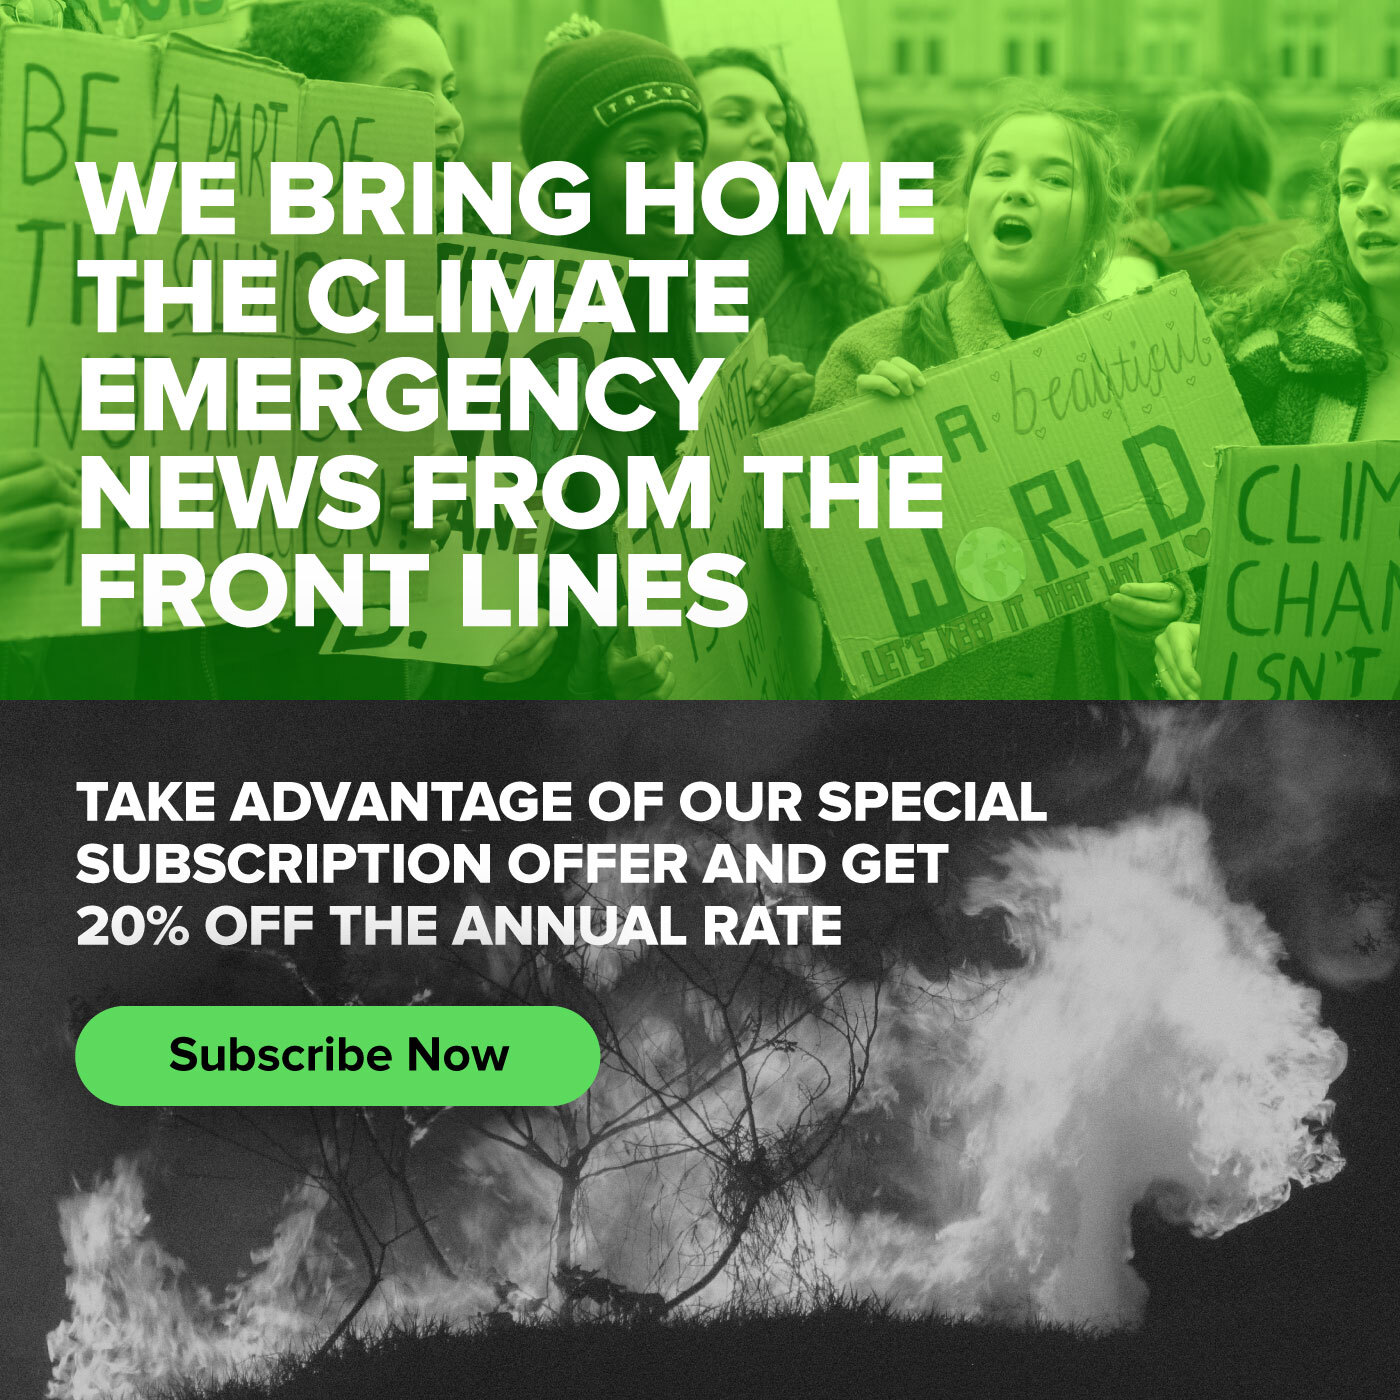 COP26: We bring home the climate emergency news from the front lines